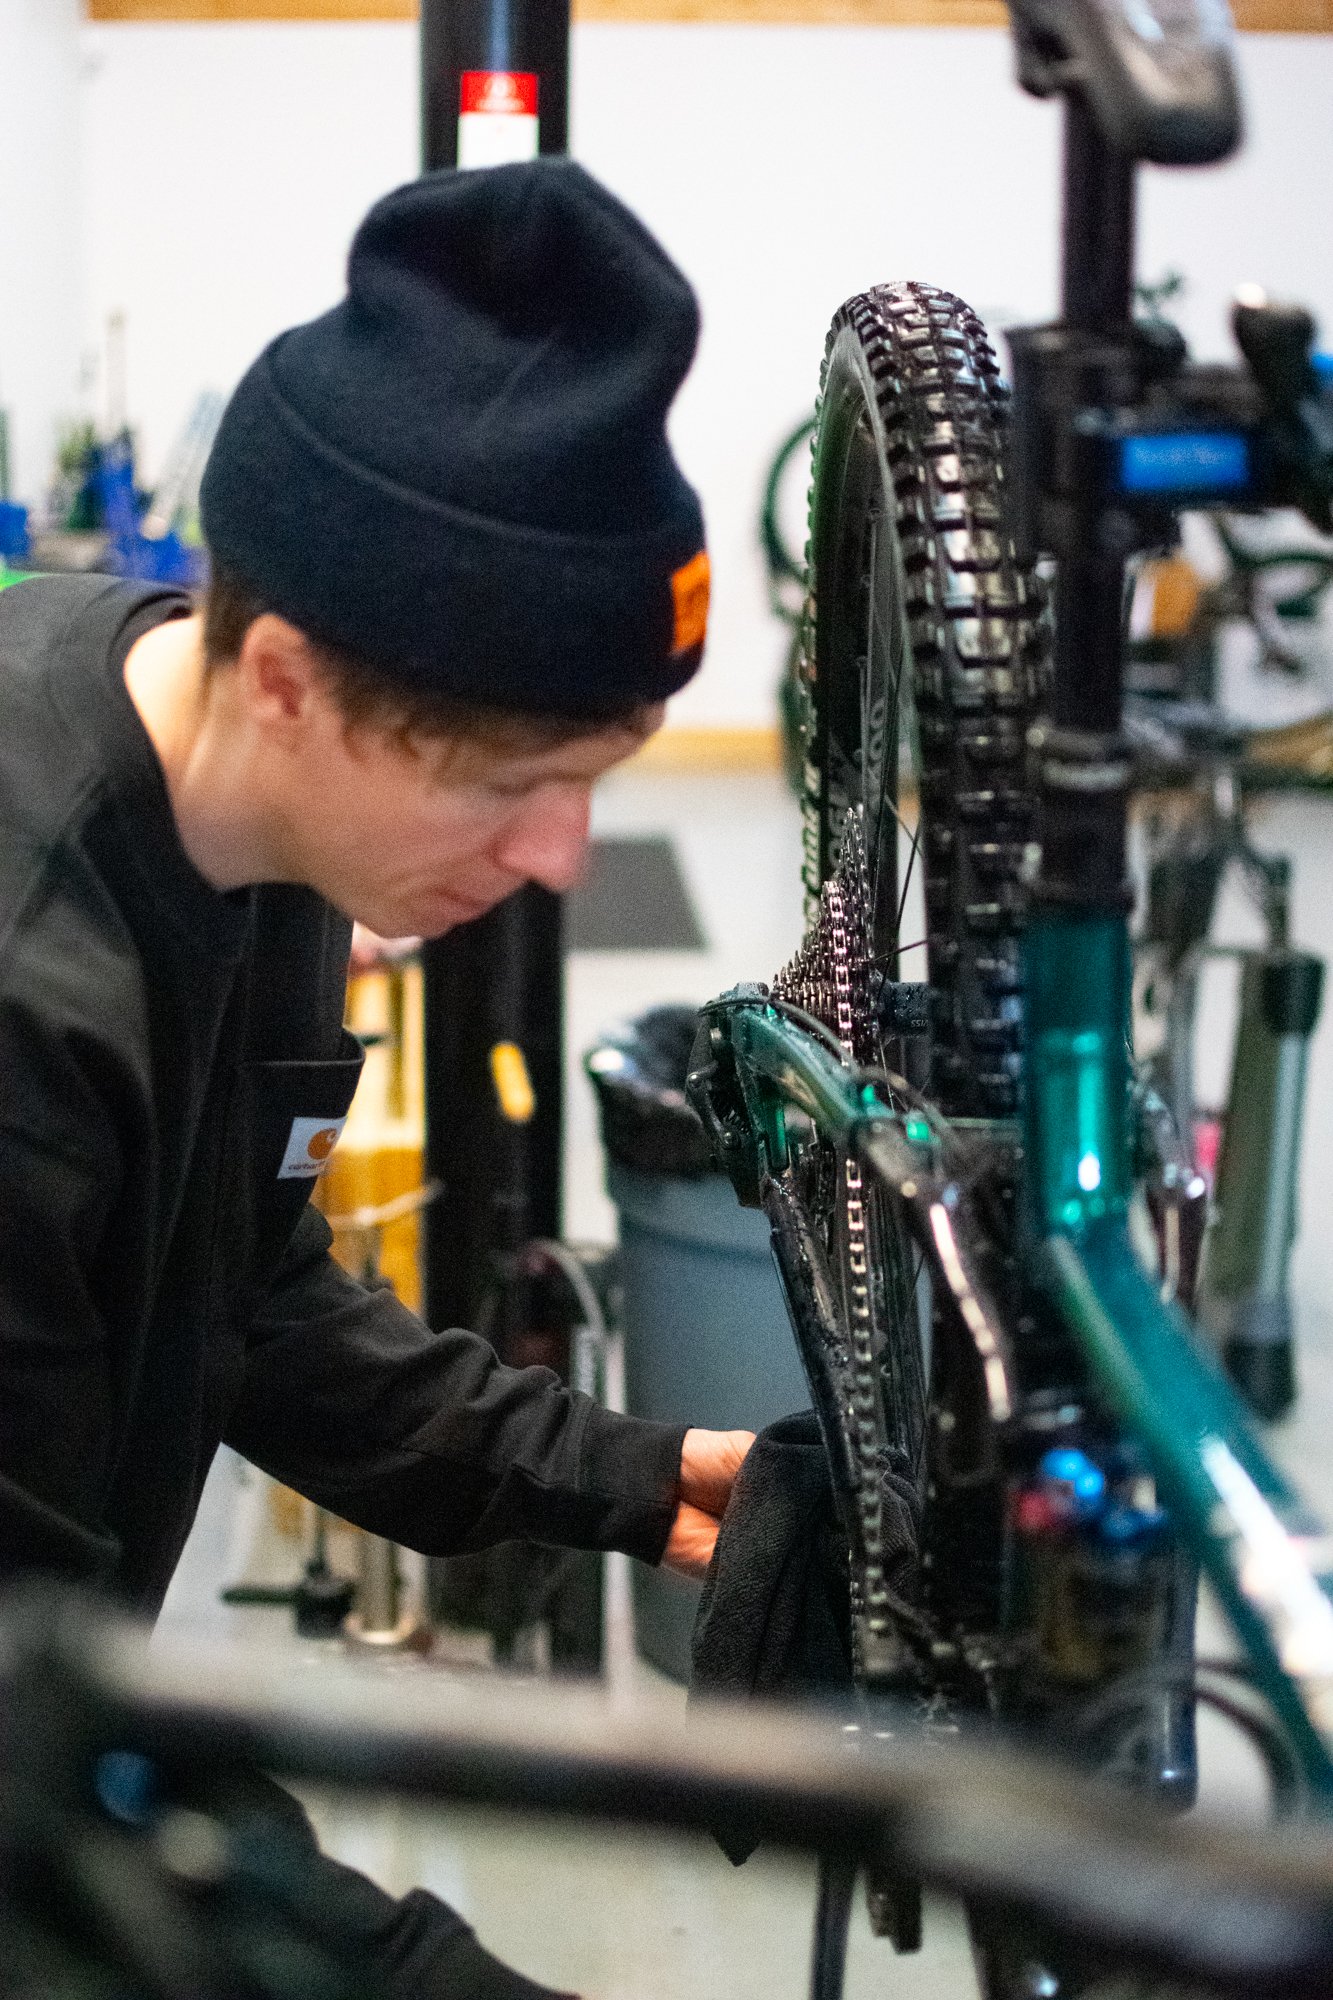 It's always a tricky decision this time of year - dry lube or wet lube?
Do you go for wet lube and clean your drivetrain more often, or go dry lube and hope it doesn't wash off? 
What's your go-to??
.
.
.
.
#BikeShop #Wrenching #BikeMechanic #MTB #Mo